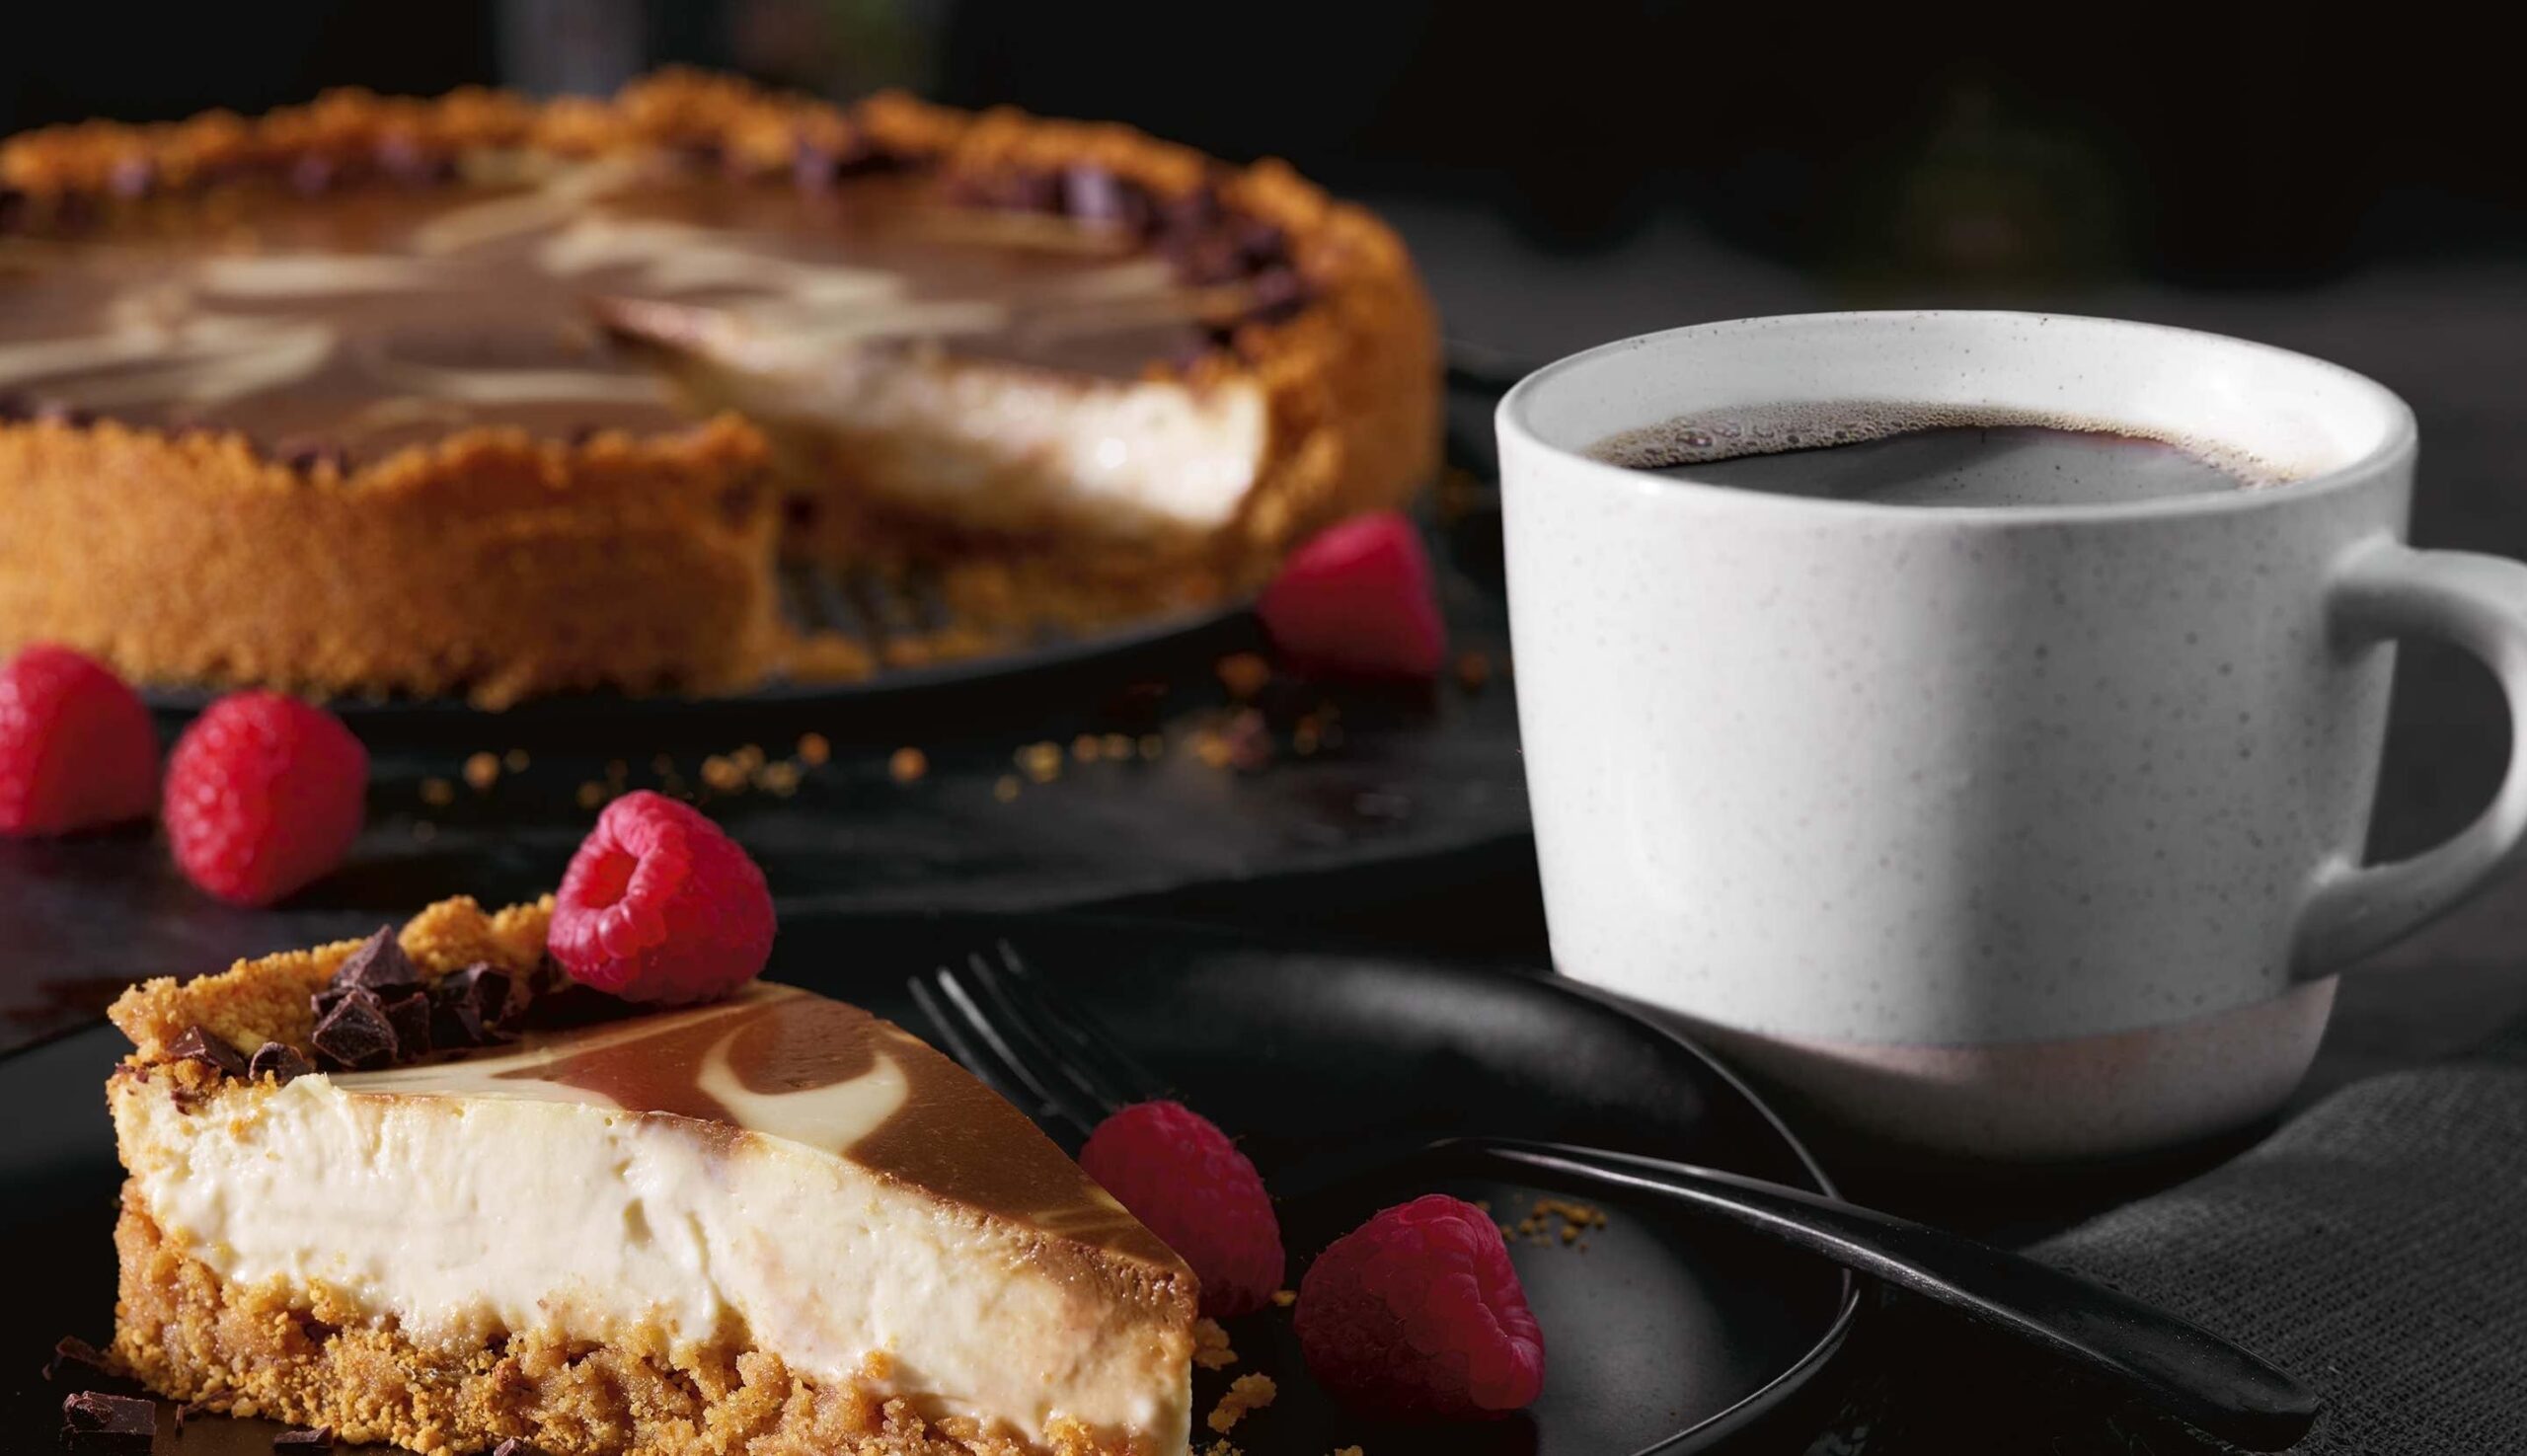  Dessert for breakfast? Yes, please! With Cheesecake Coffee Cups, you can have your cake and coffee too.